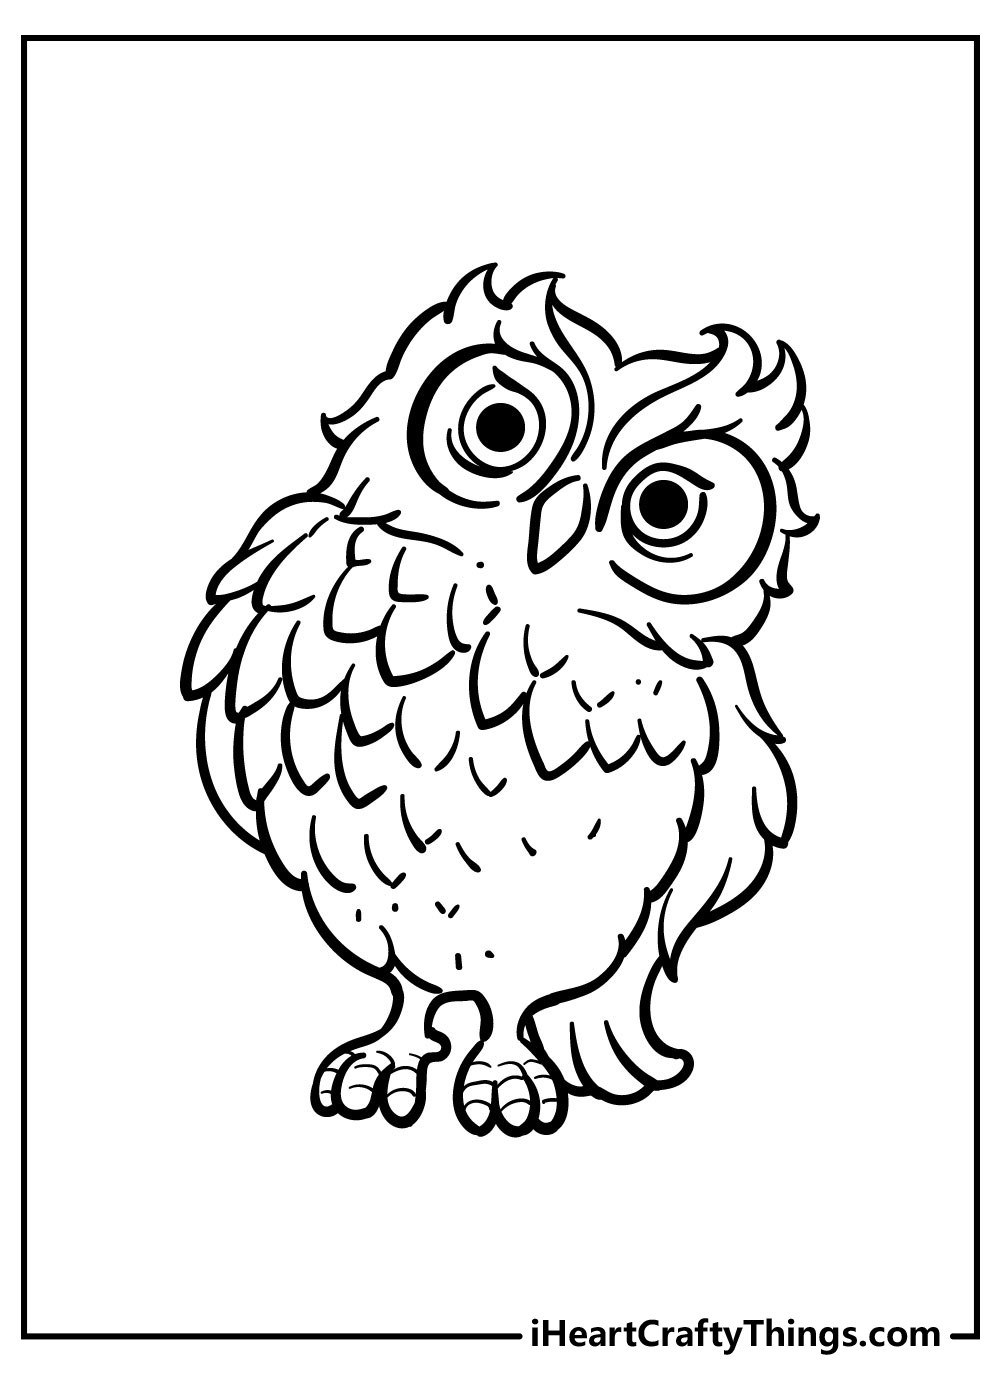 Wise owl coloring pages free printables